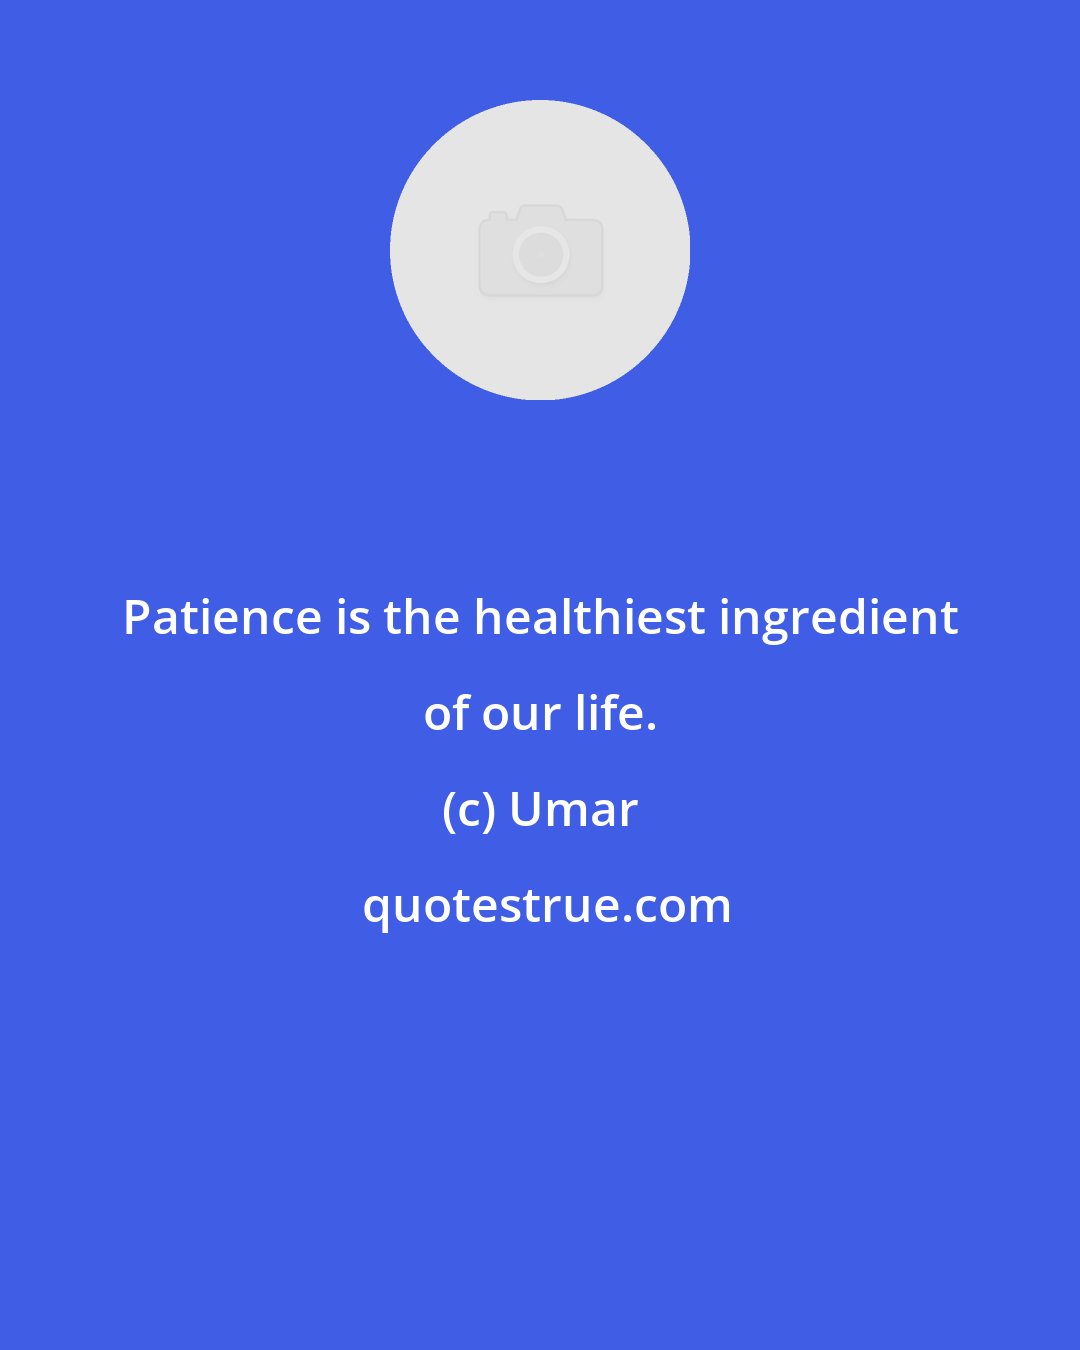 Umar: Patience is the healthiest ingredient of our life.